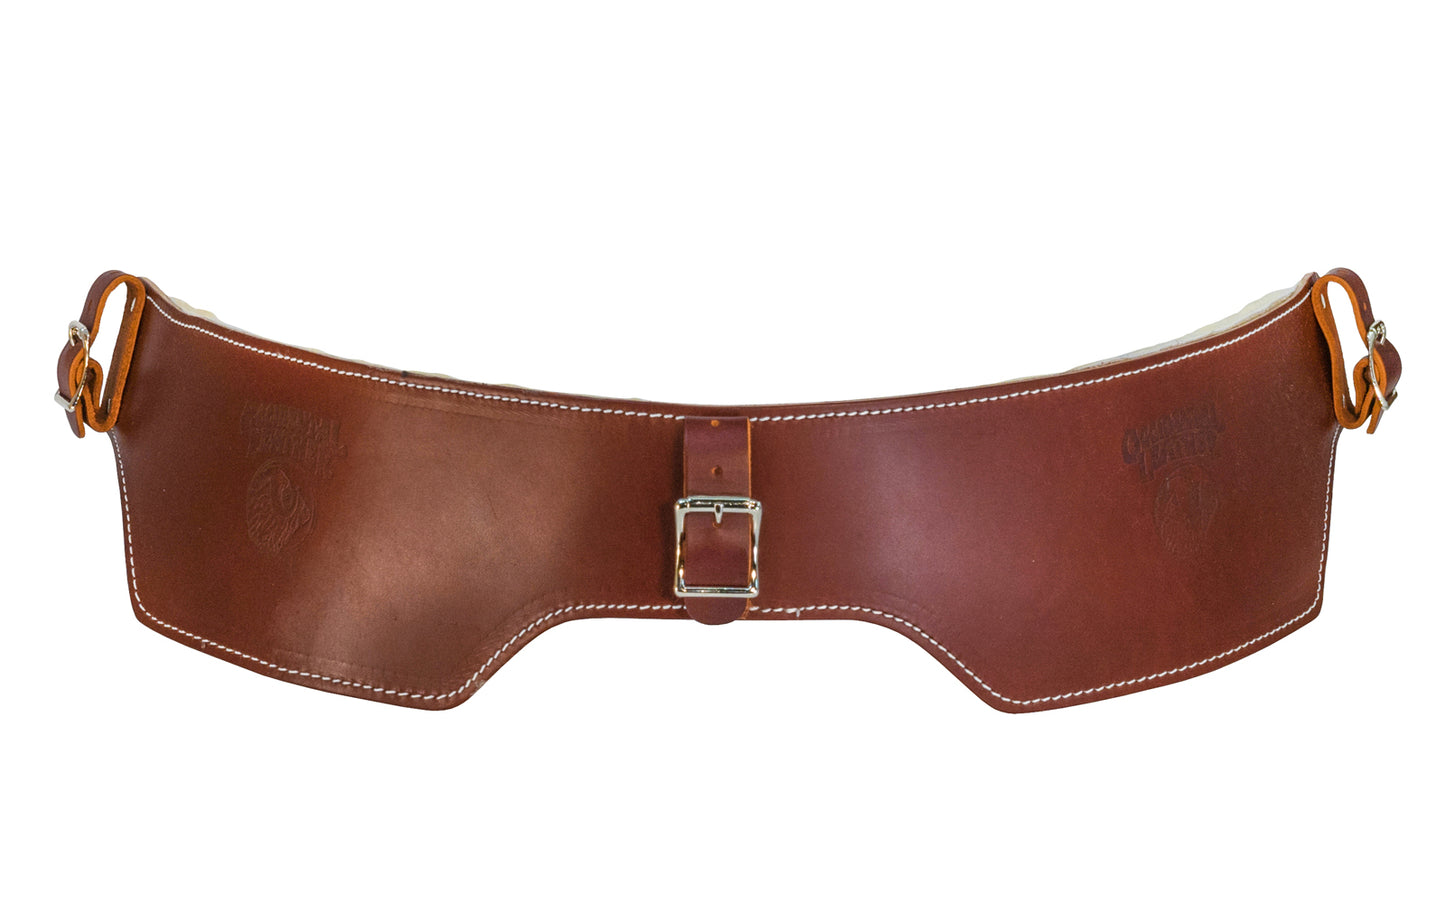 Occidental Leather's Belt Liner with Sheepskin relieves you from cutting edges & circulation problems associated with safety & tool belts. Sheepskin pads provide maximum comfort & is a natural insulator, warm & comfortable in winter, & cool in summer. Comfortable when using with tool belts. Model 5005 S - Small Size